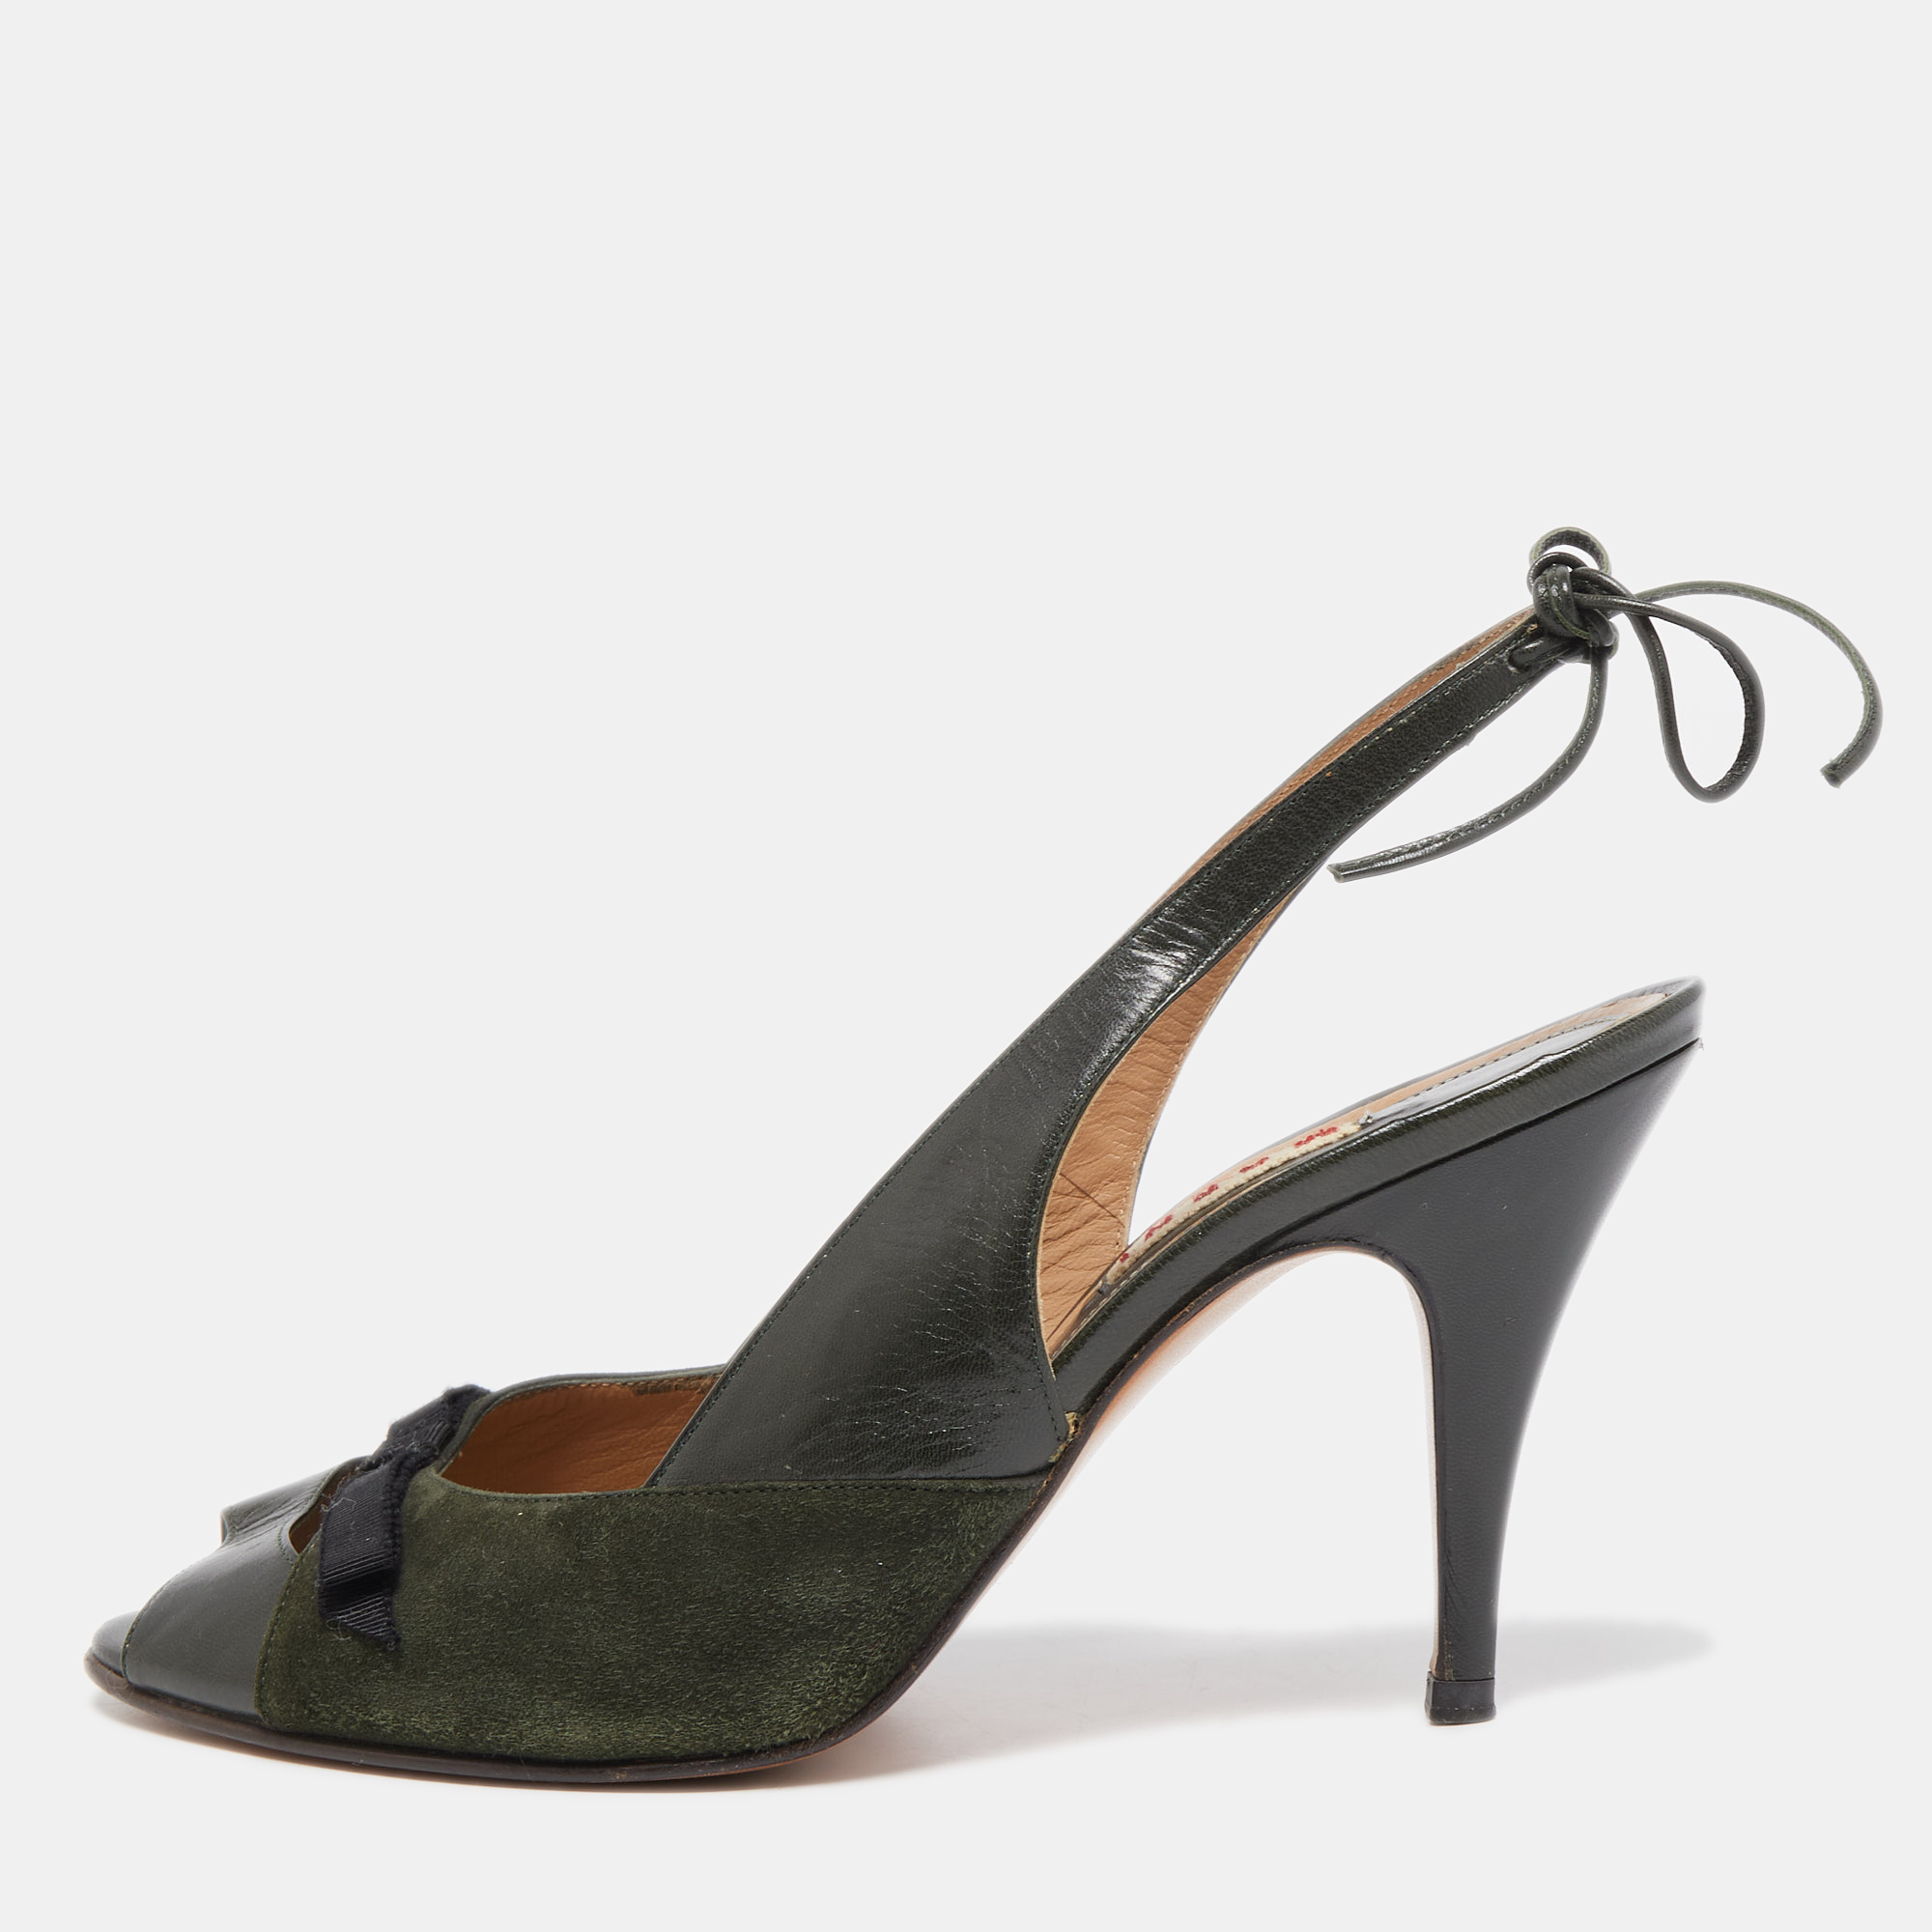 Pre-owned Marni Dark Green Leather And Suede Peep Toe Tie Knot Slingback Sandals Size 38.5